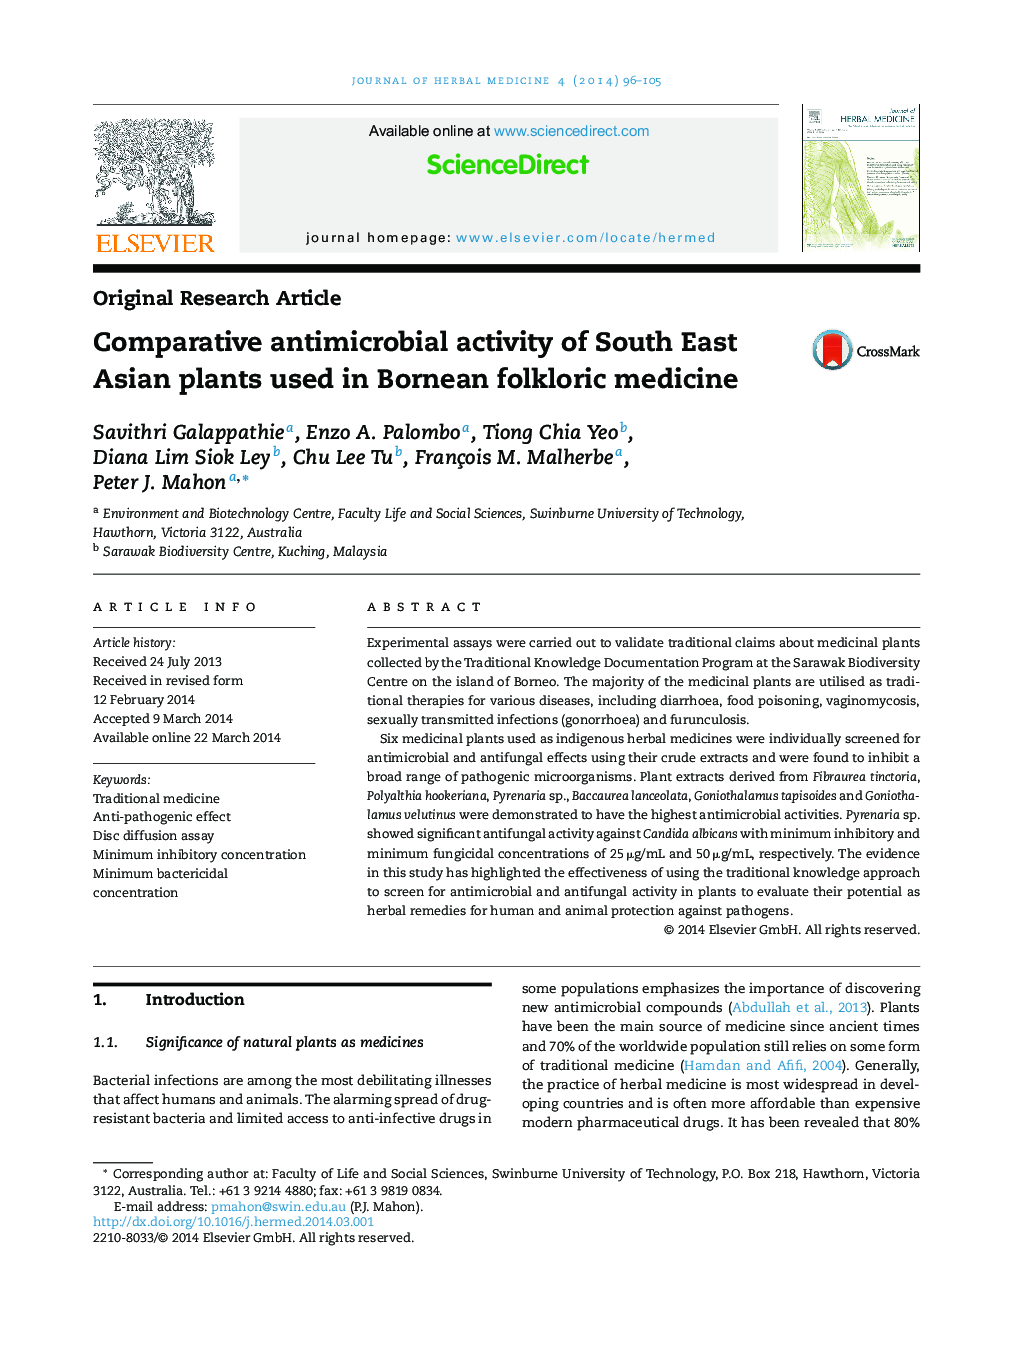 Comparative antimicrobial activity of South East Asian plants used in Bornean folkloric medicine